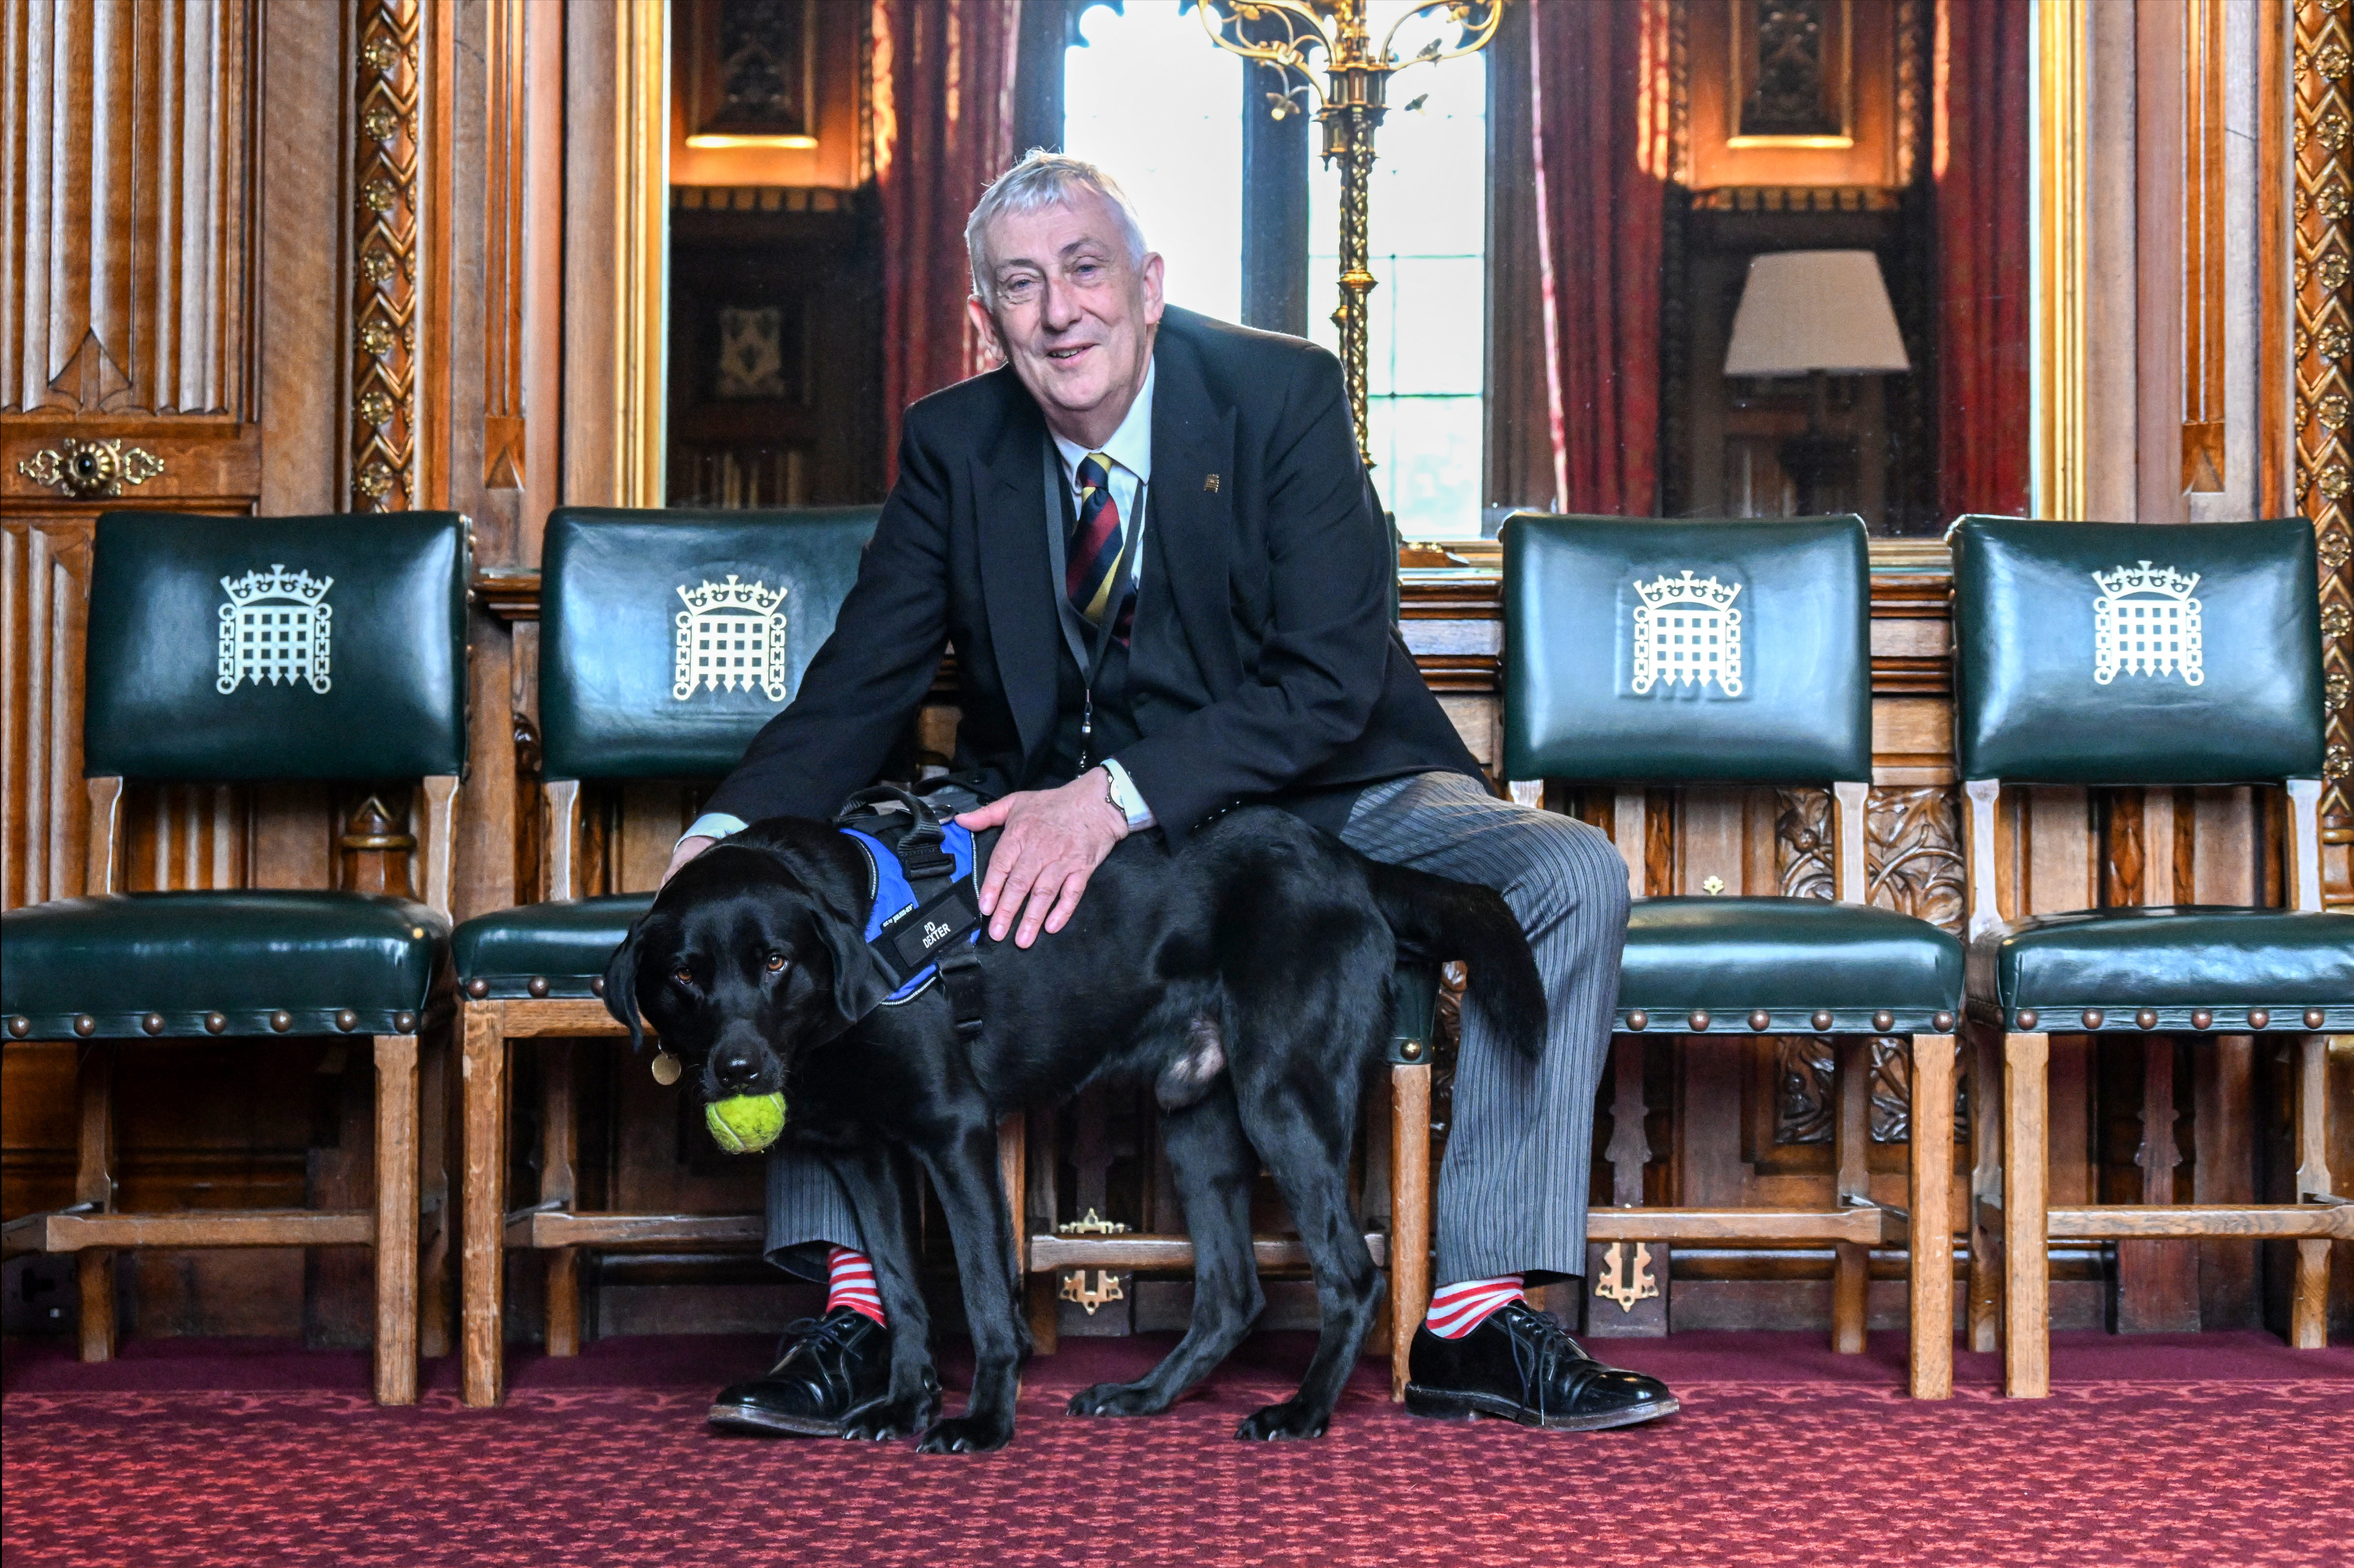 Speaker of the House of Commons Sir Lindsay Hoyle with Dexter (UK Parliament/Jessica Taylor)